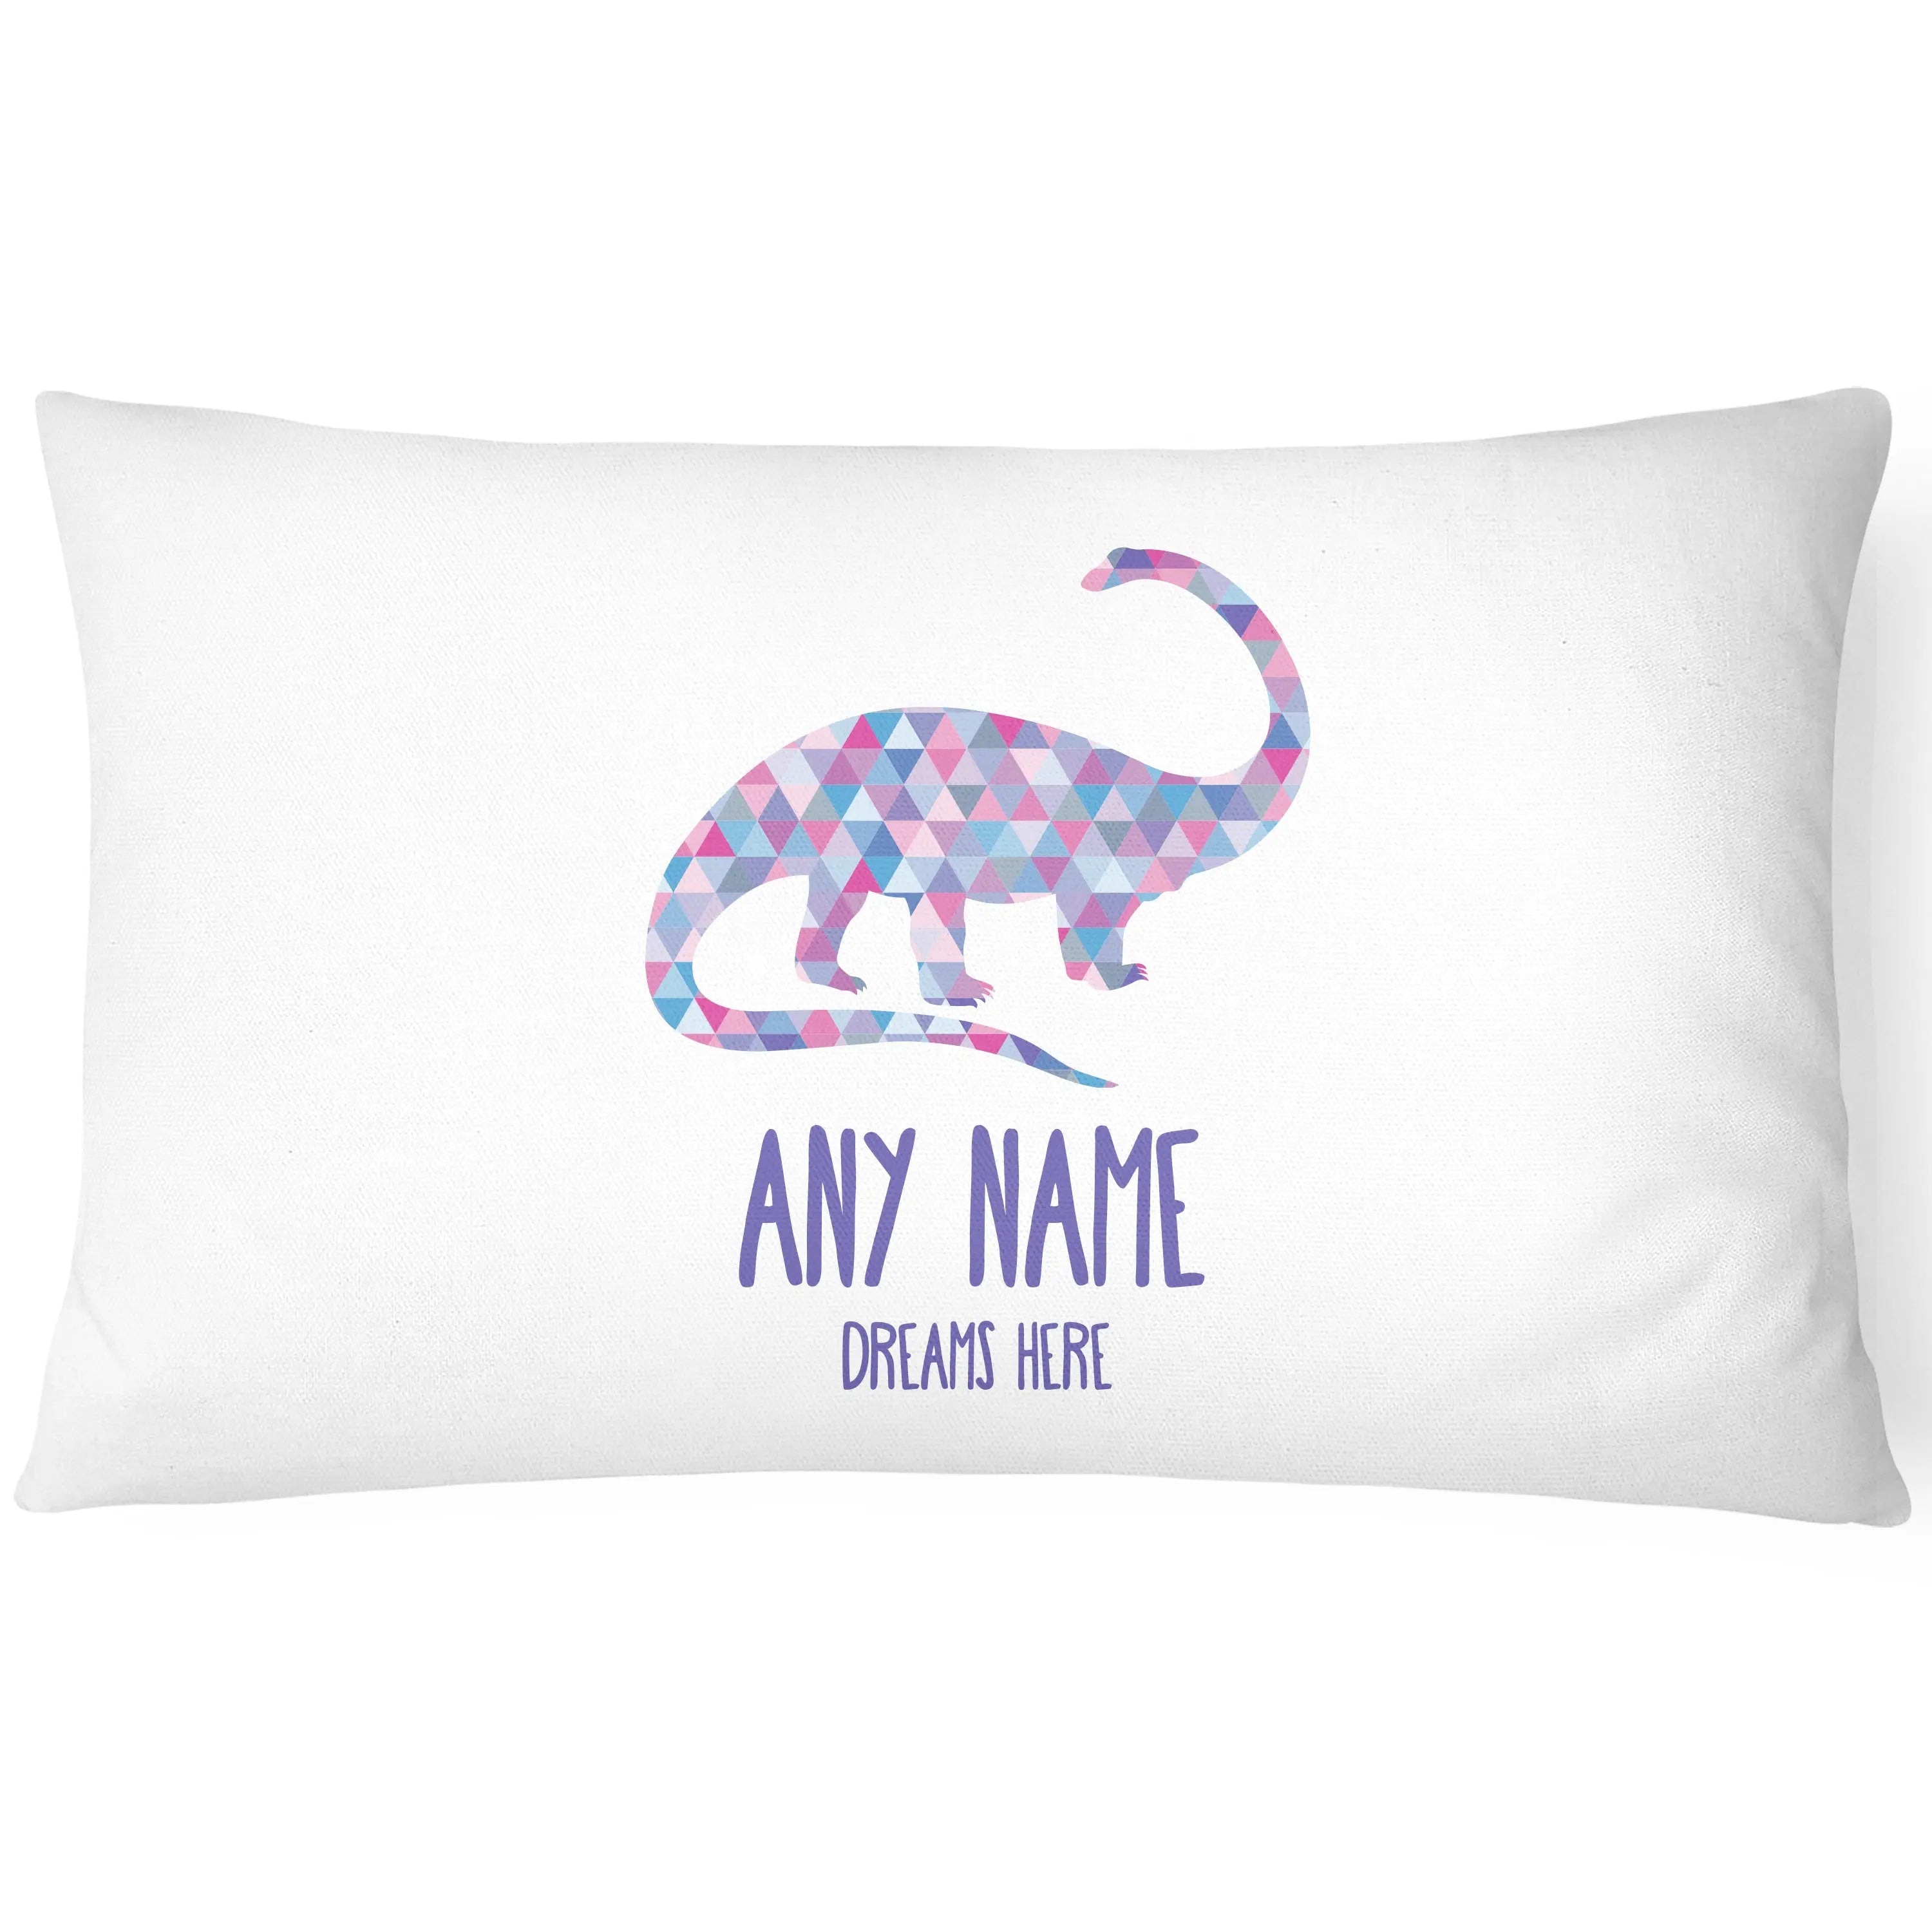 Dinosaur Children's Pillowcase - Personalise with Any Name - CushionPop